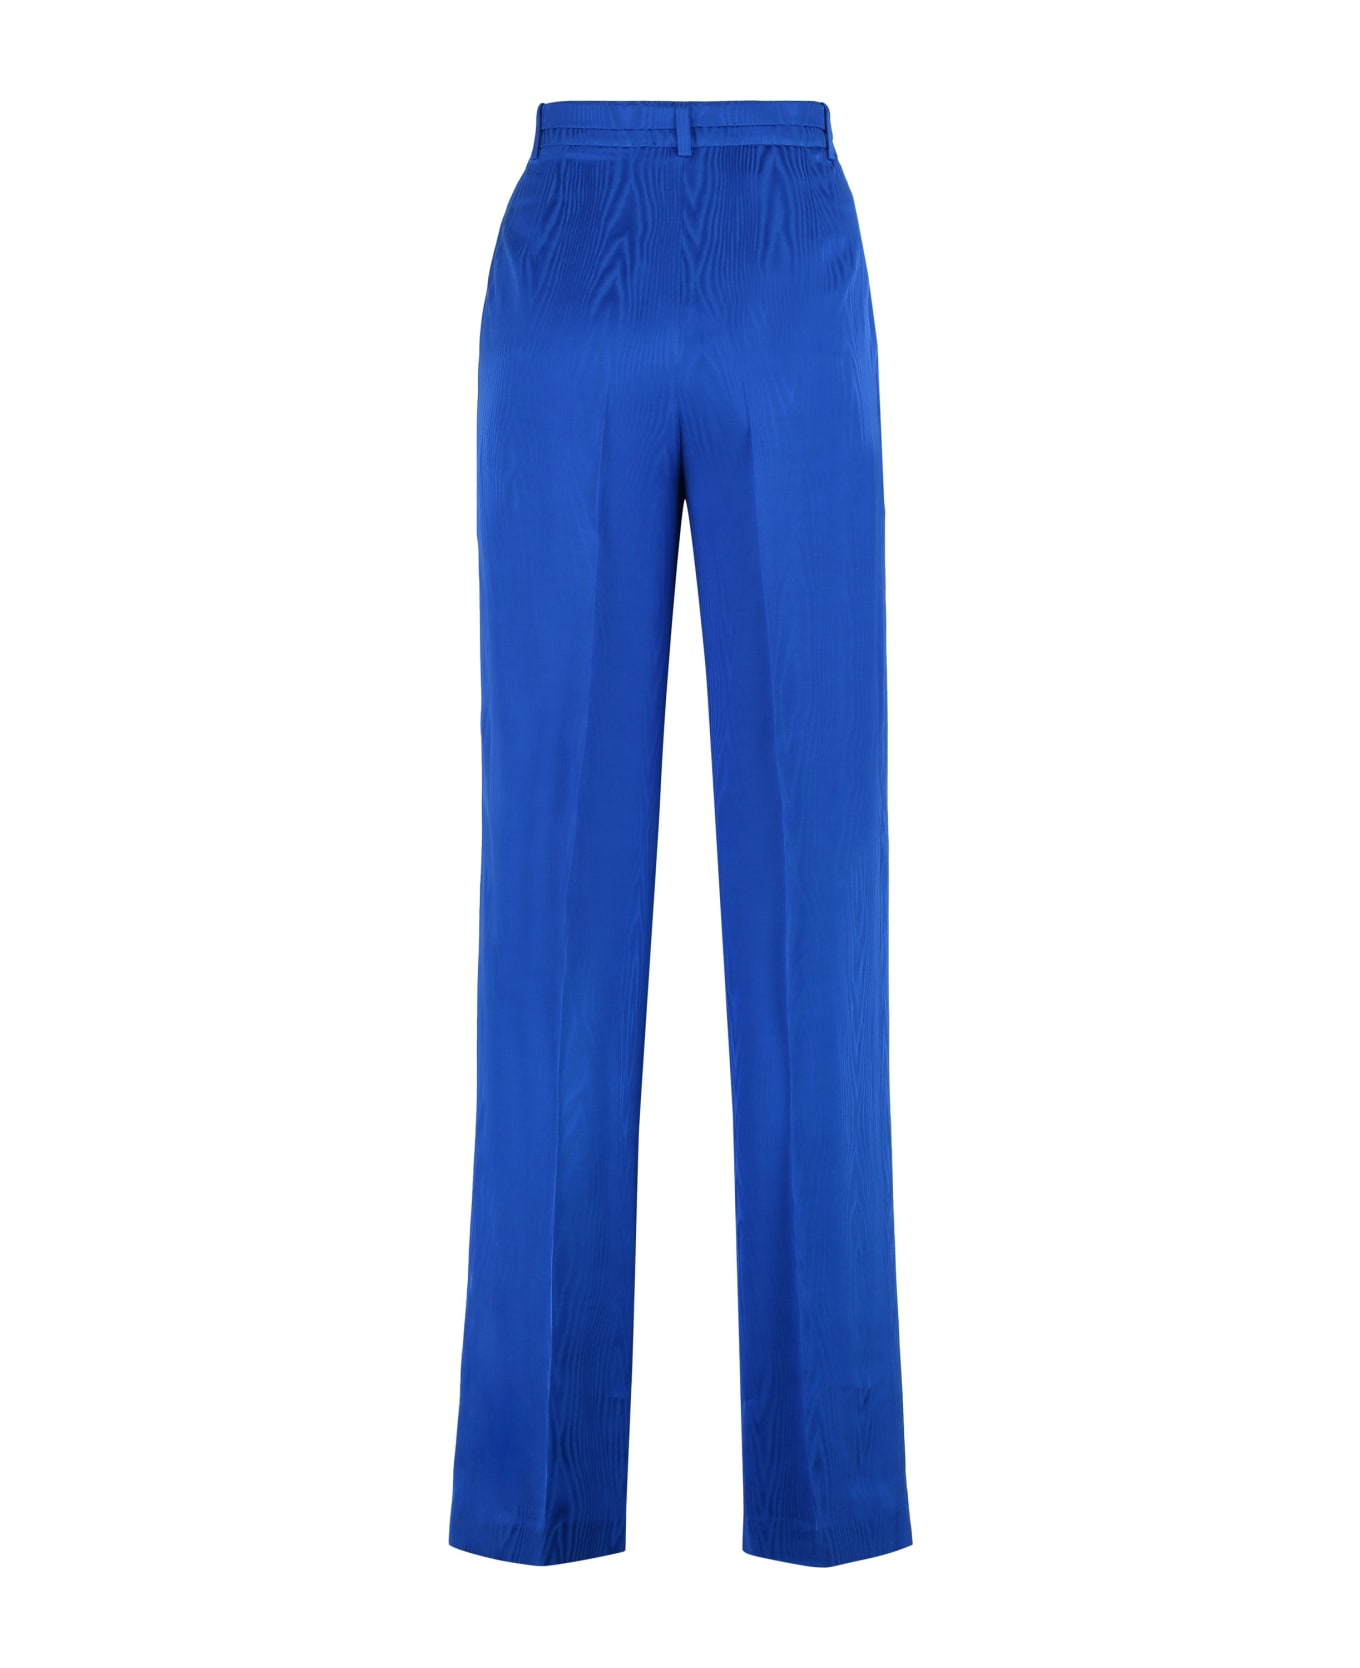 Boutique Moschino Straight-leg Trousers - blue